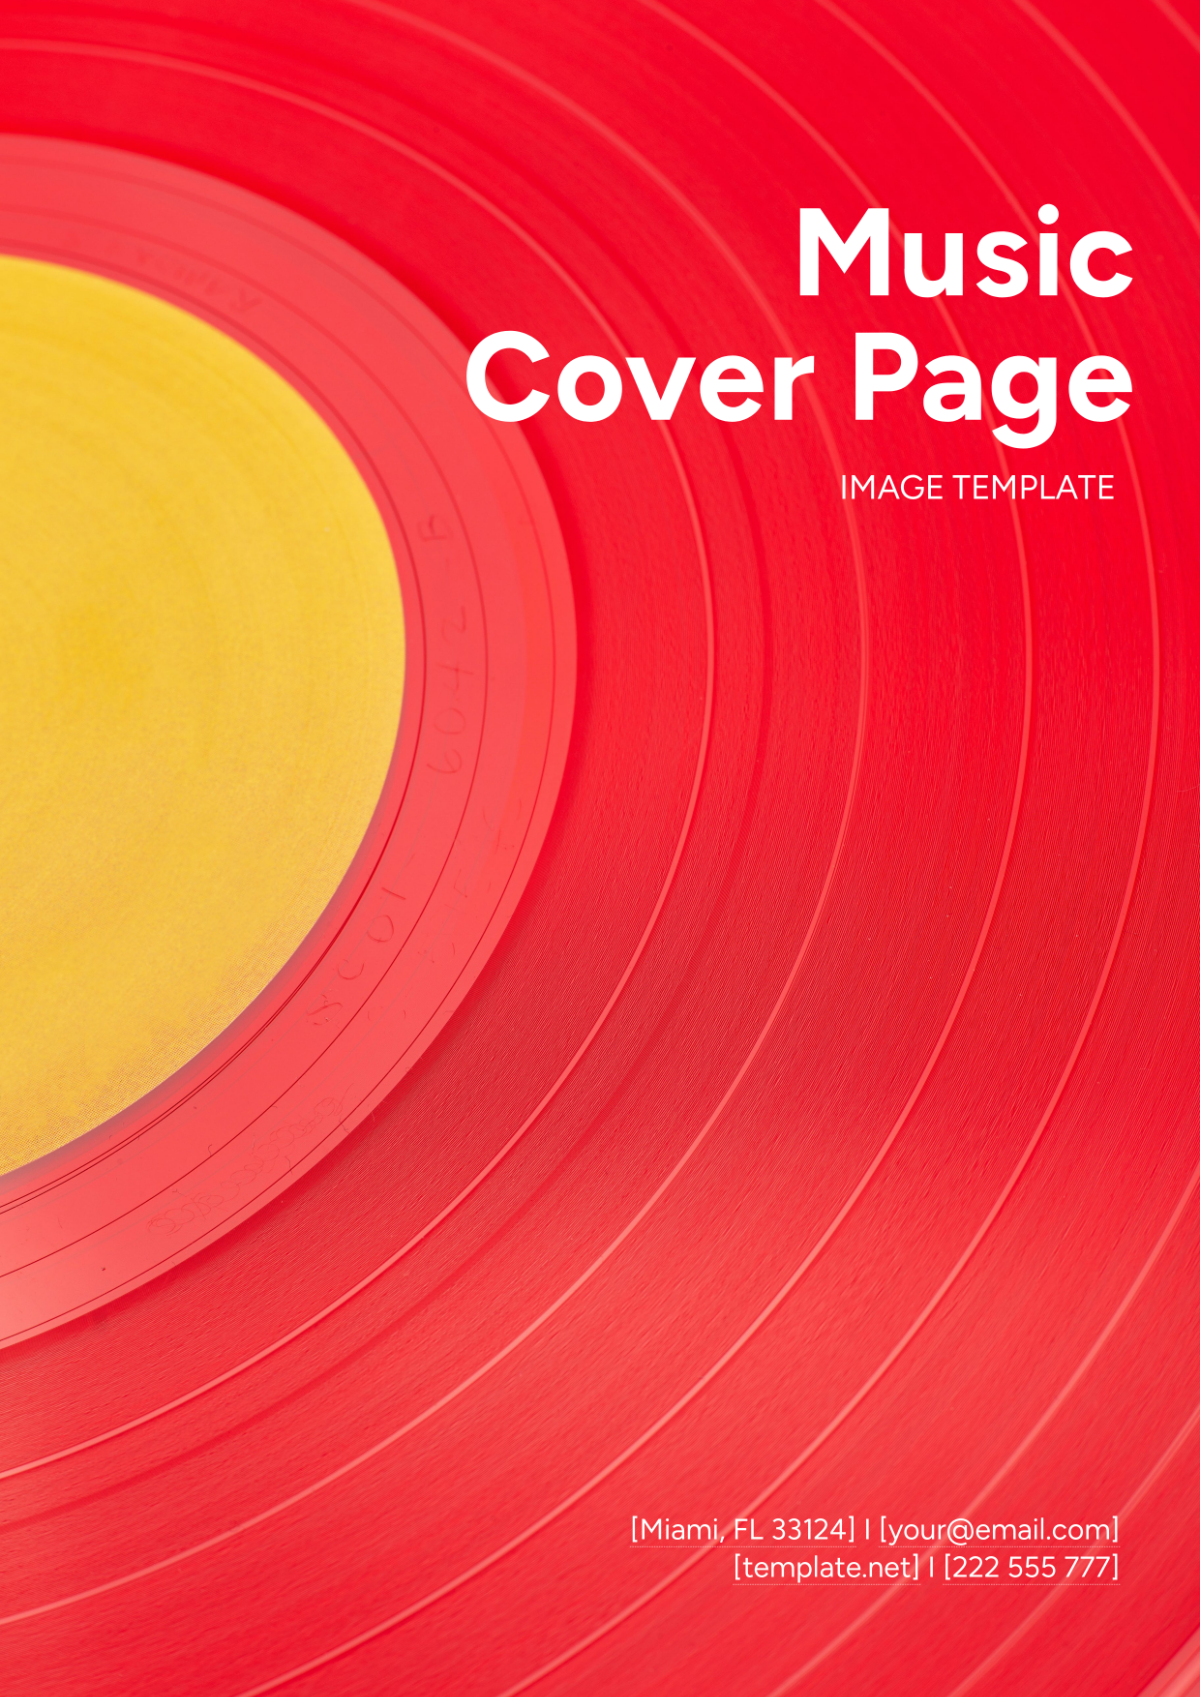 Free Music Cover Page Image Template